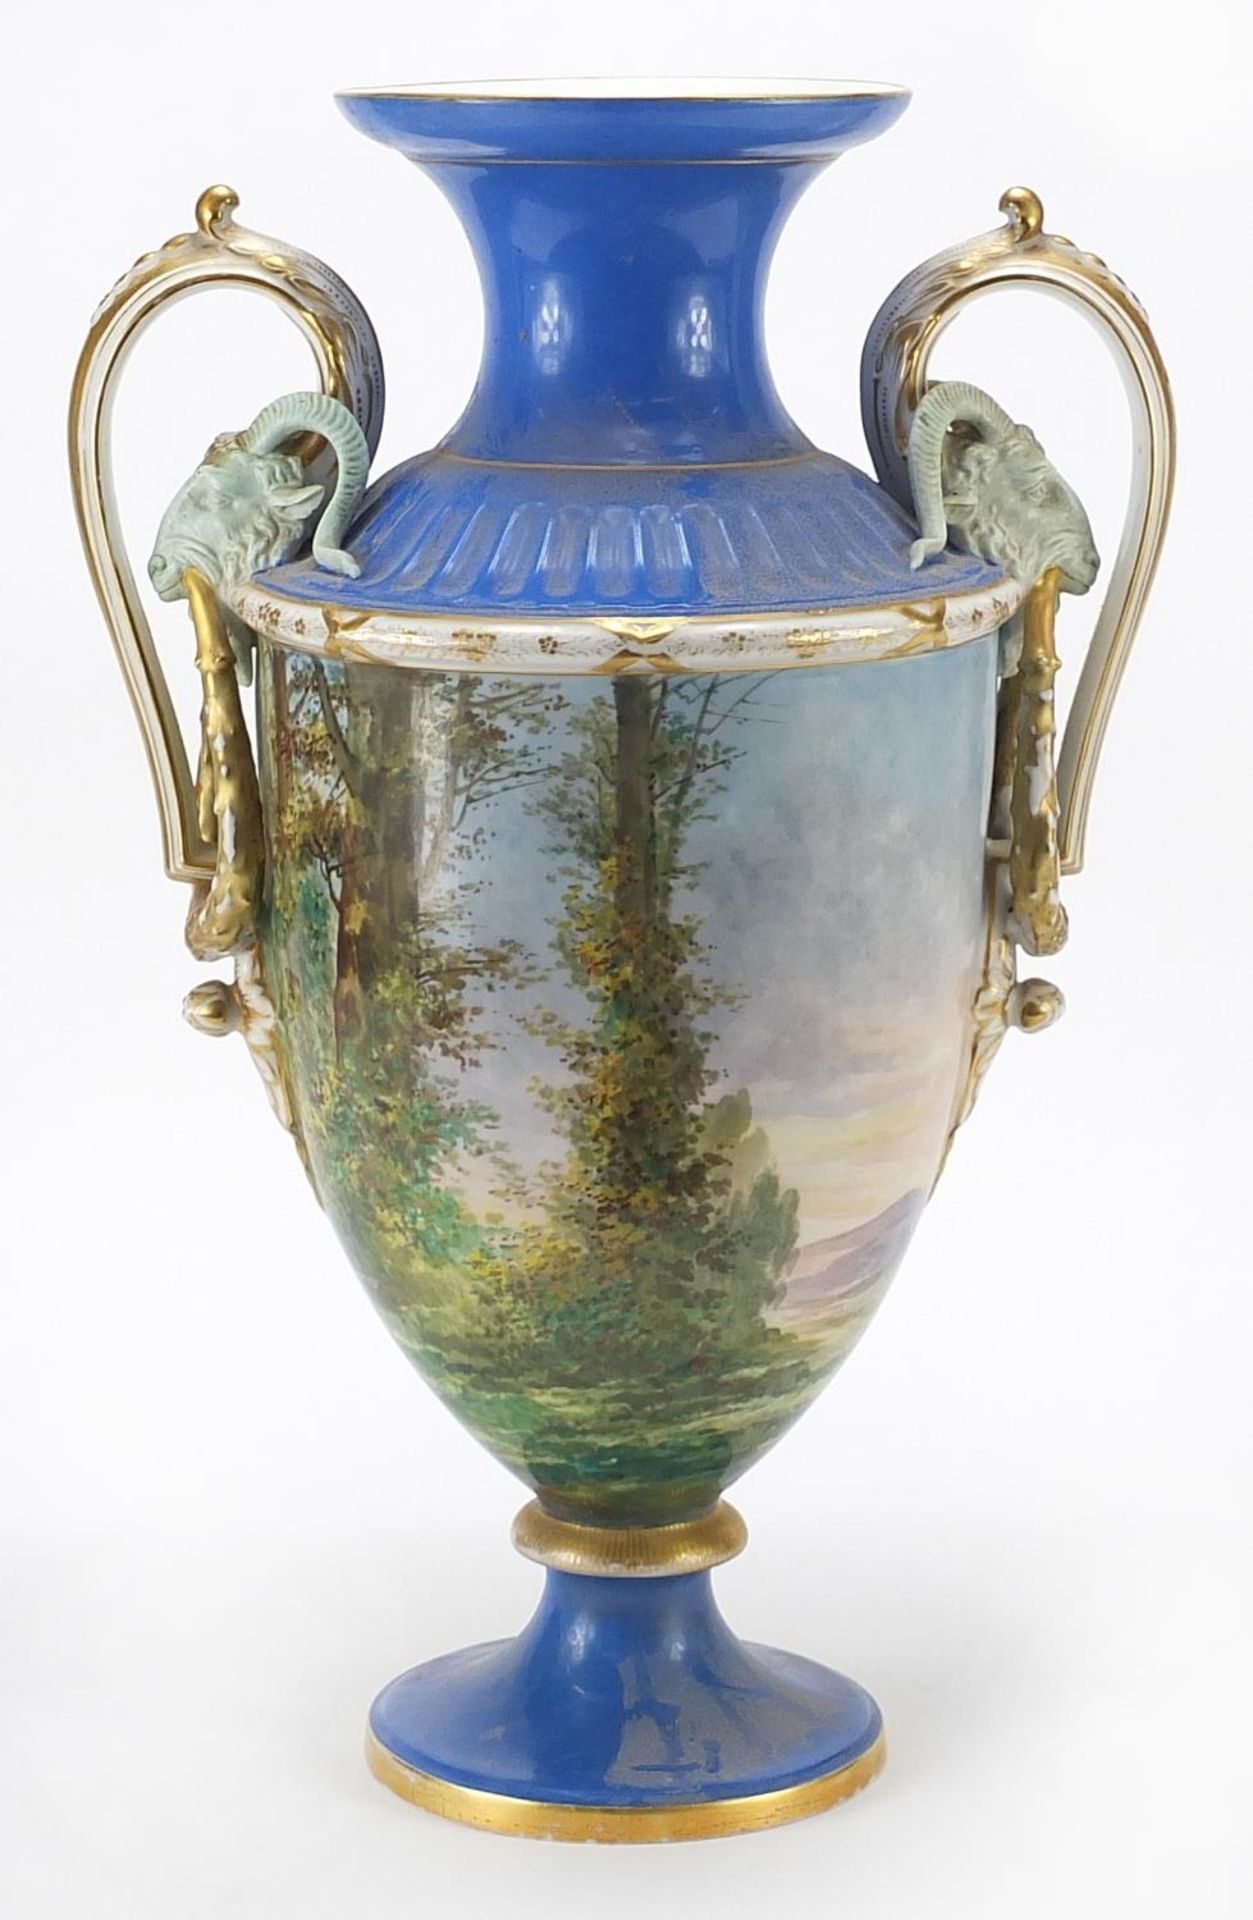 Large 19th century porcelain vase with twin goat head handles, hand painted with a young gypsy - Image 3 of 4